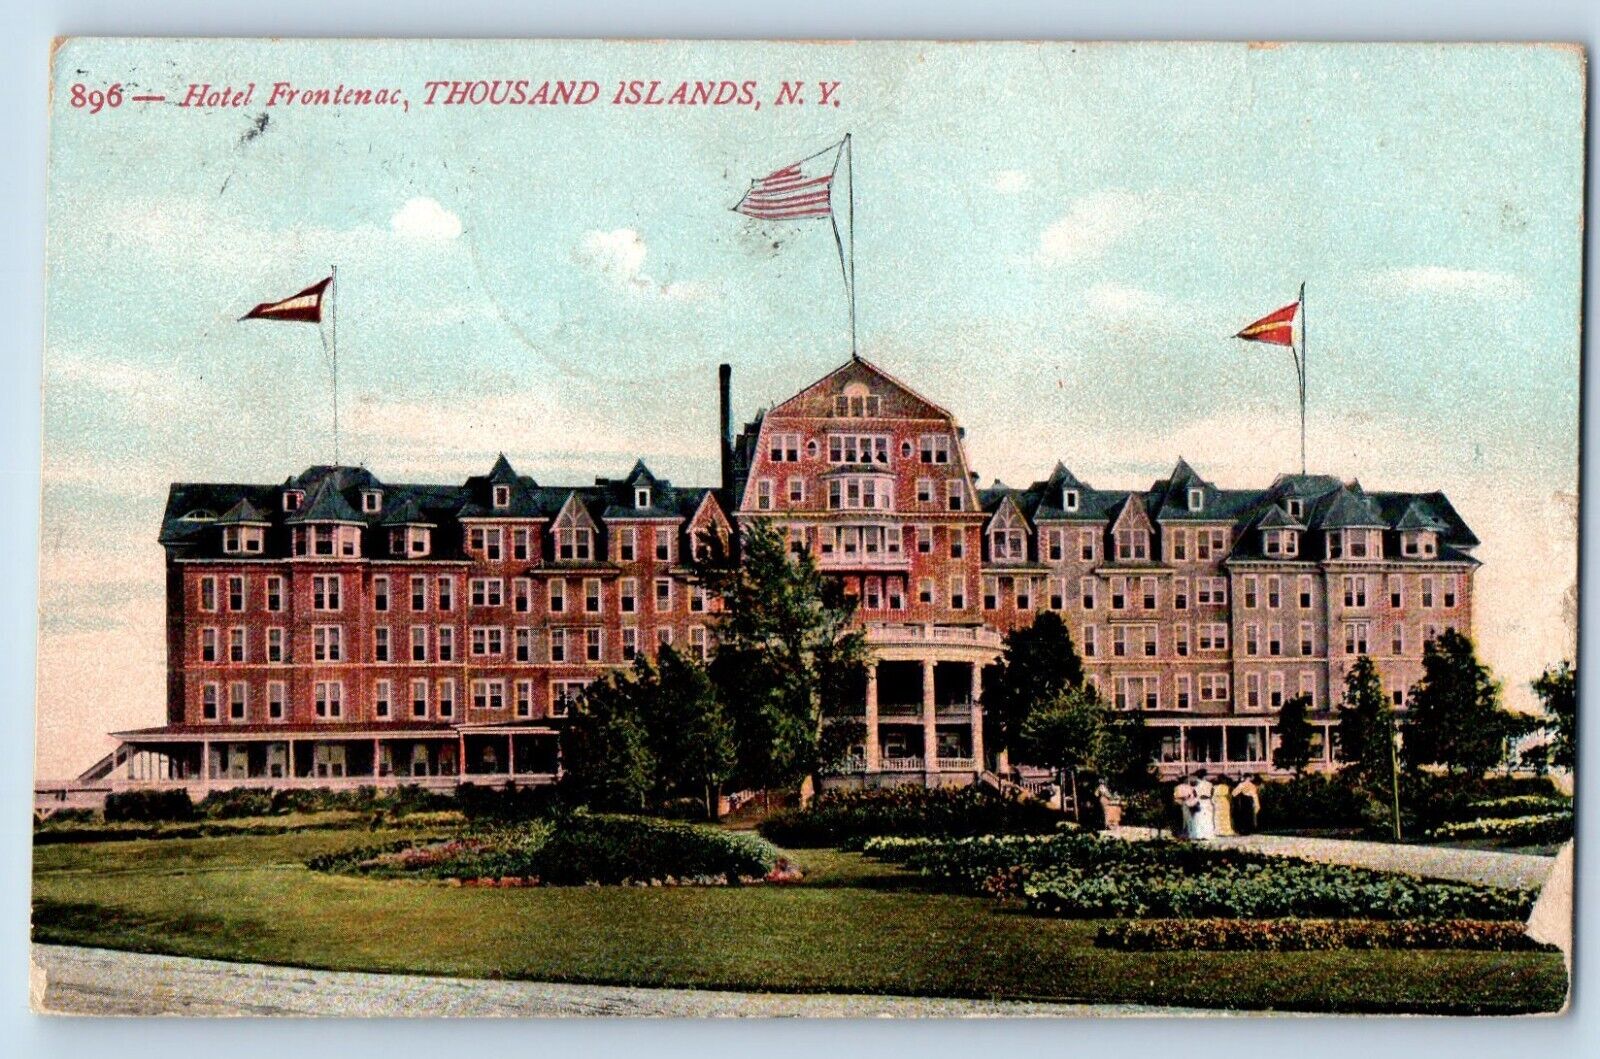 Thousand Islands New York NY Postcard Hotel Frontenac Building Front View 1910